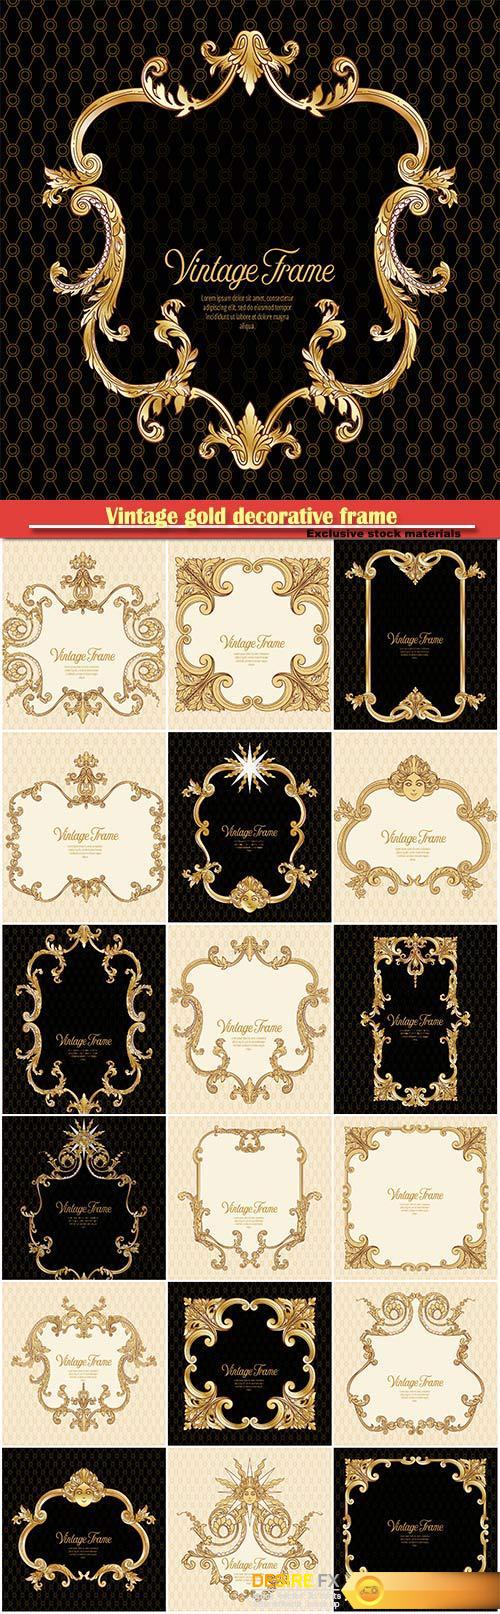 Vintage gold decorative frame in rococo style for menus, ads, advertisements, labels